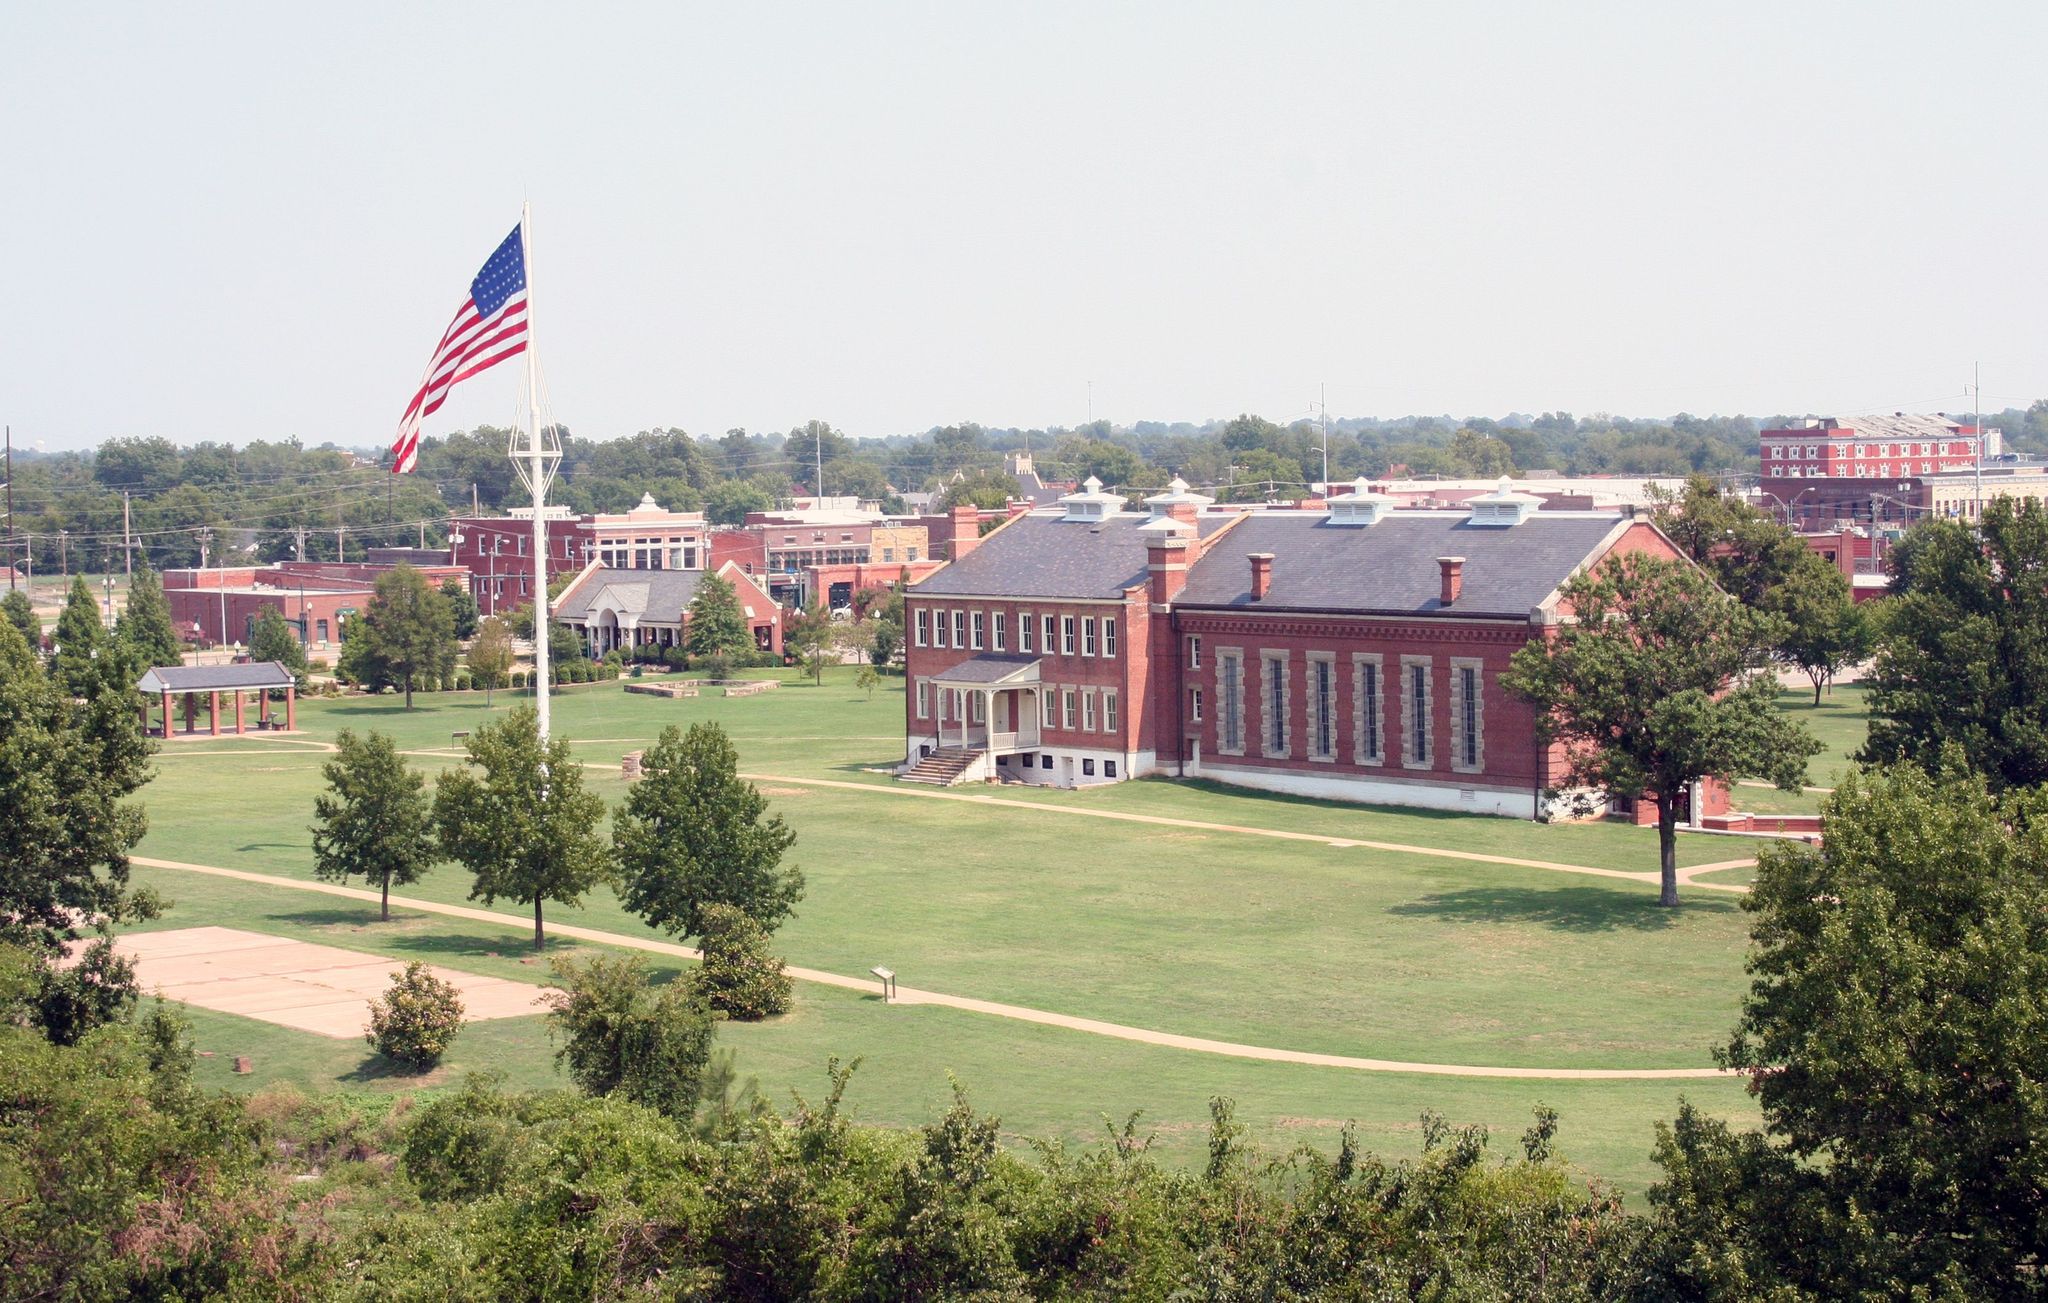 The former barracks, courthouse, and jail serves as the park's visitor center